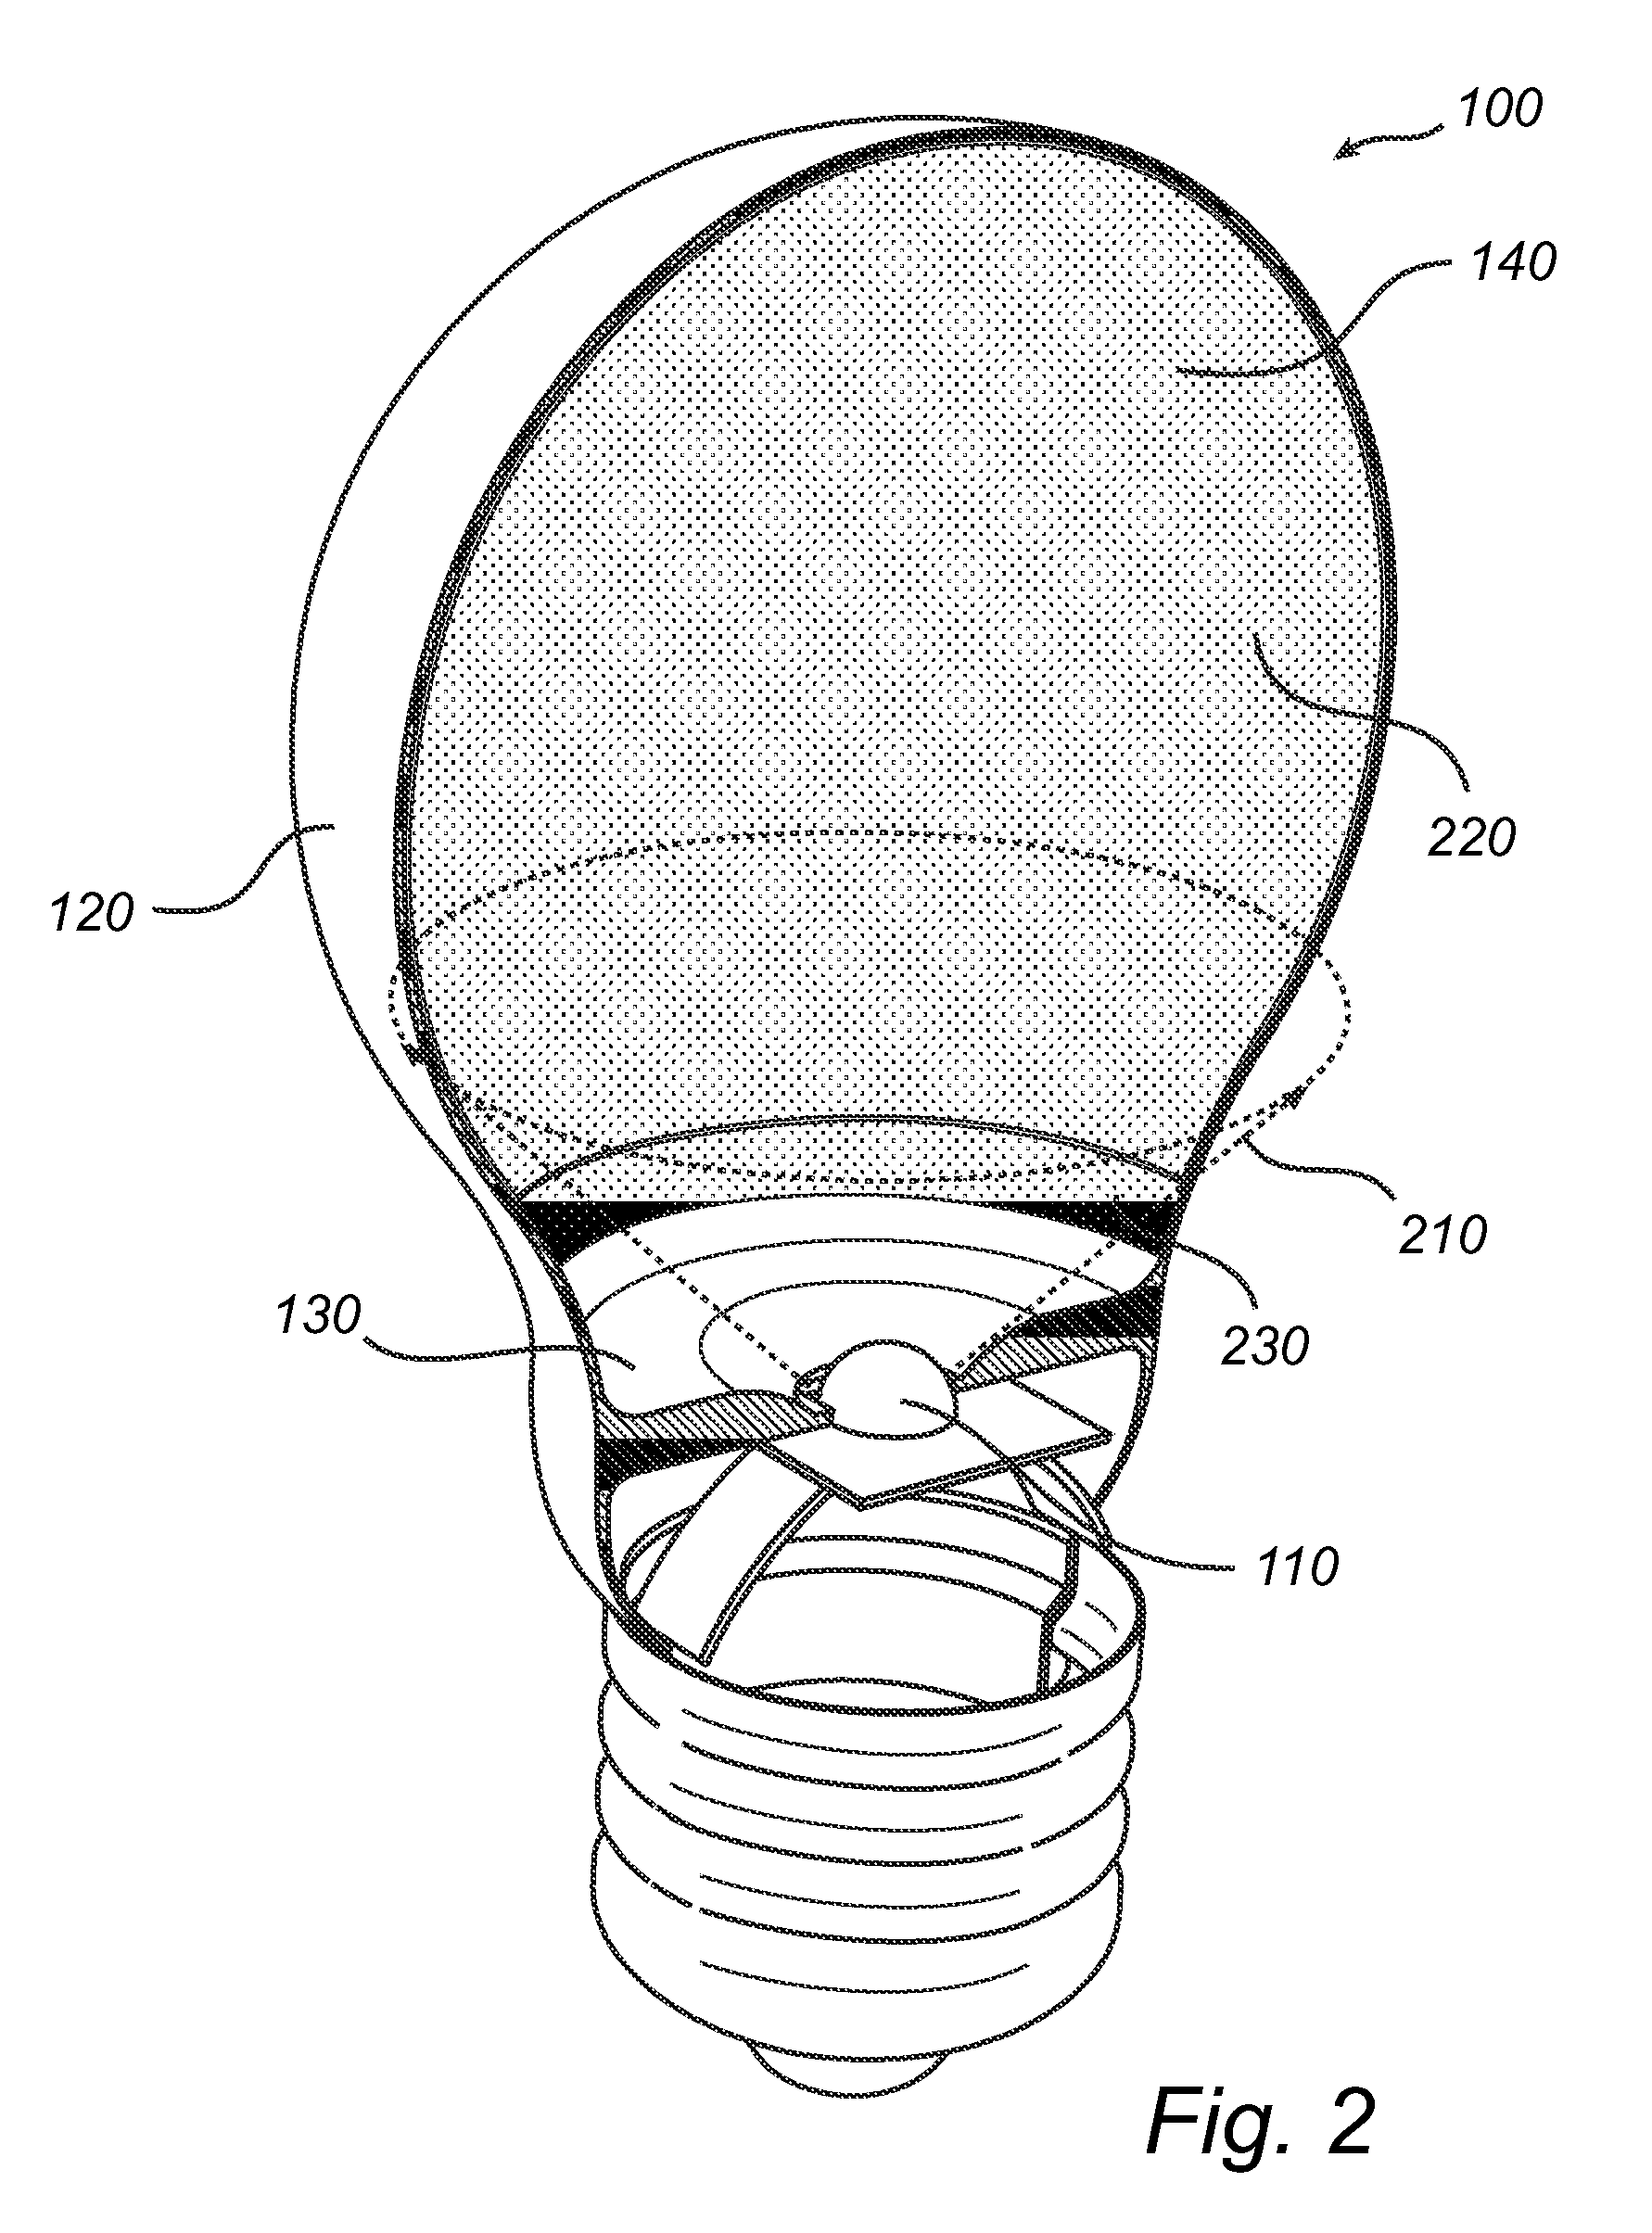 Illumination device with carrier and envelope